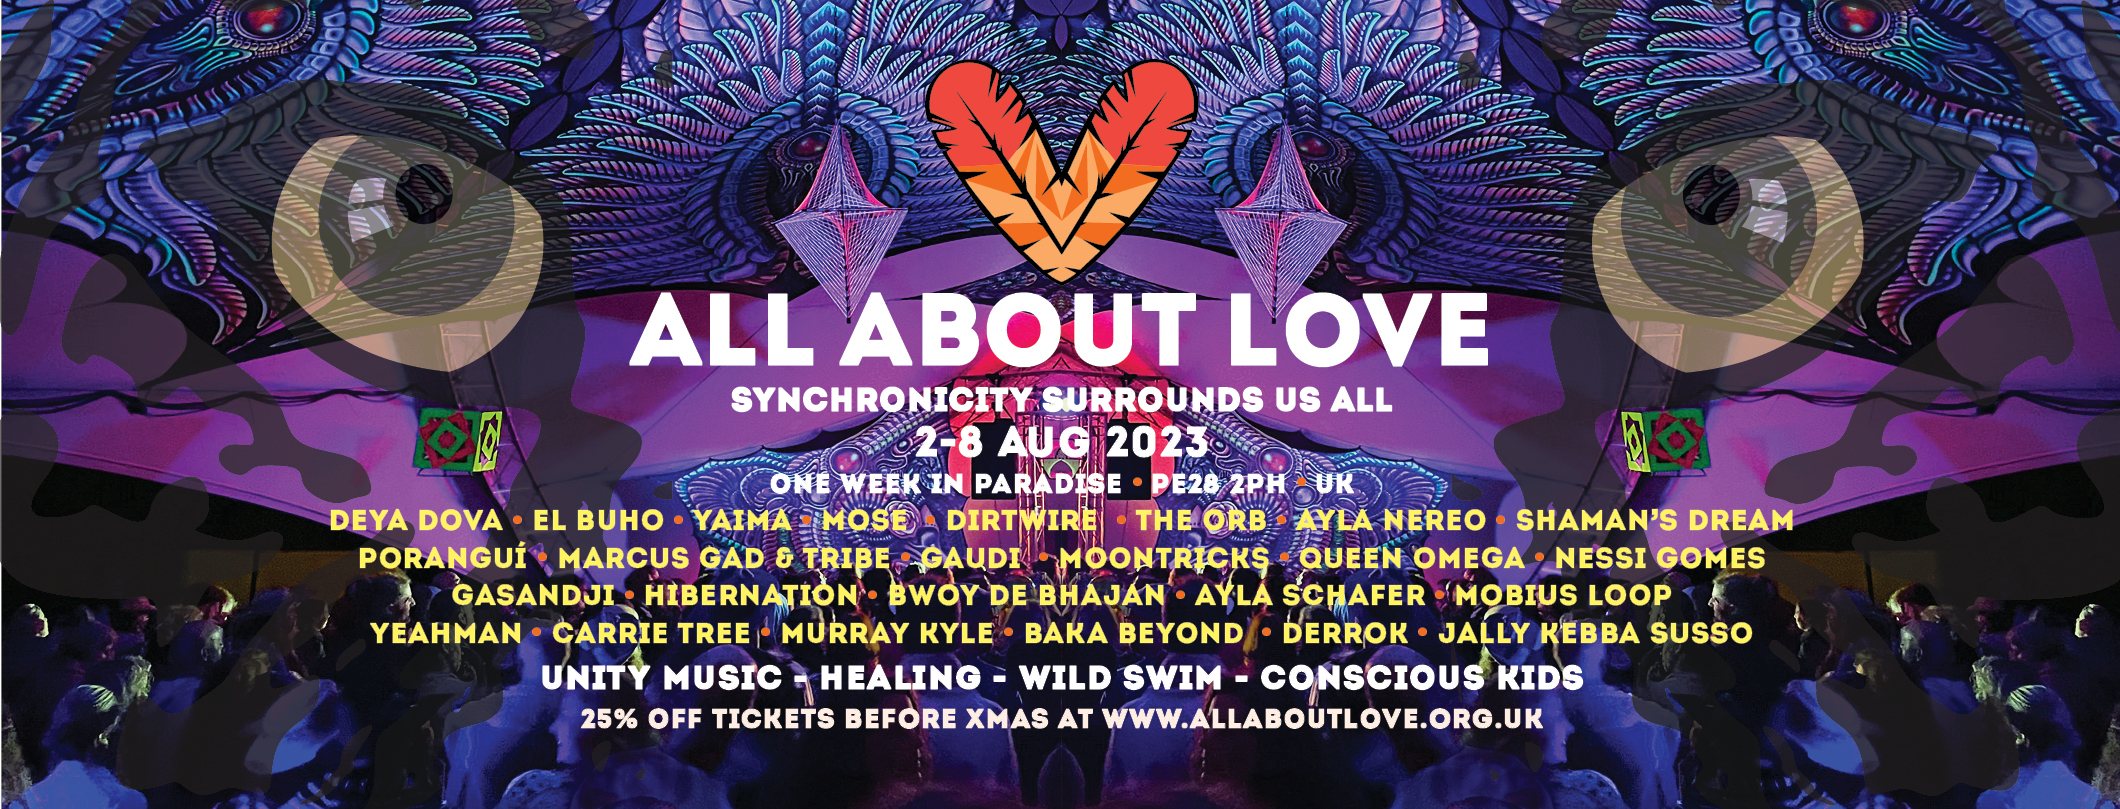 All About Love Festival 2023 Tickets, Wed, Aug 2, 2023 at 1200 PM